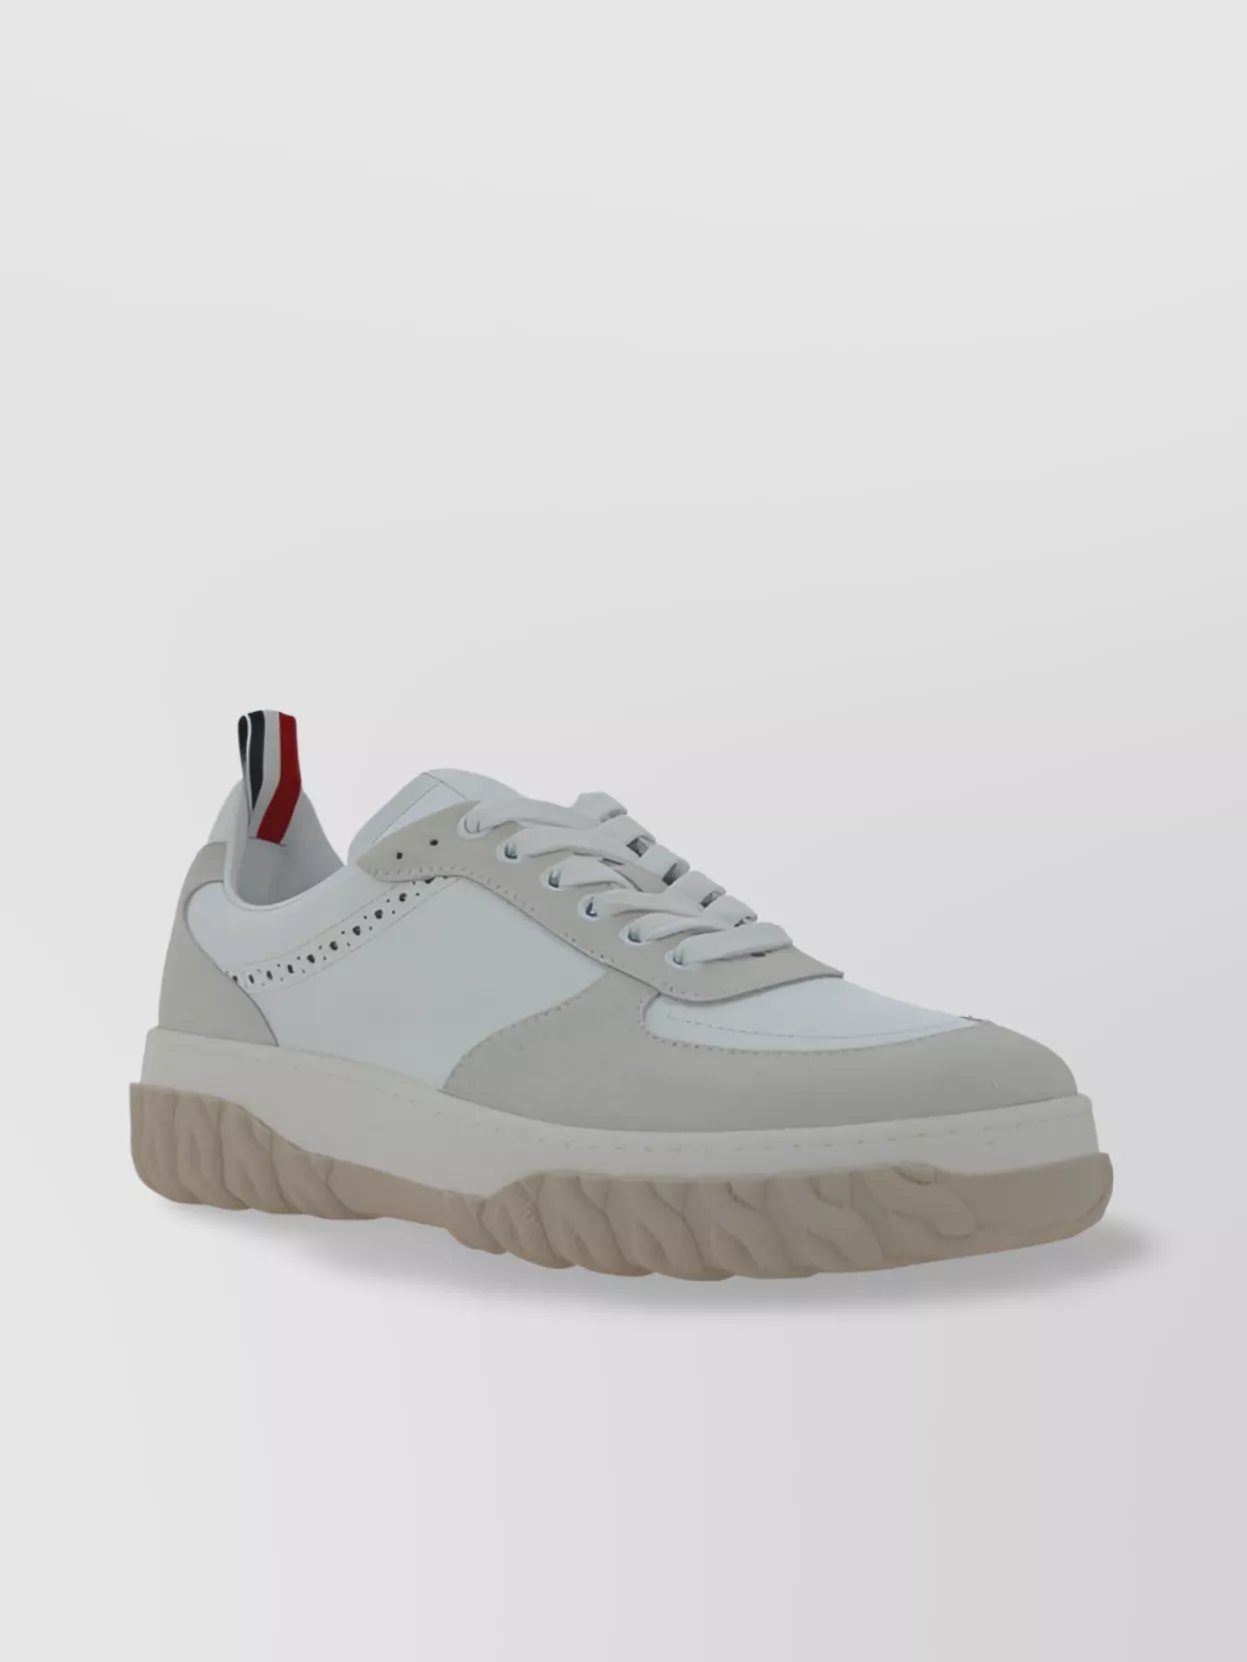 Thom Browne Sporty Calfskin Chunky Sole Sneakers In Gray